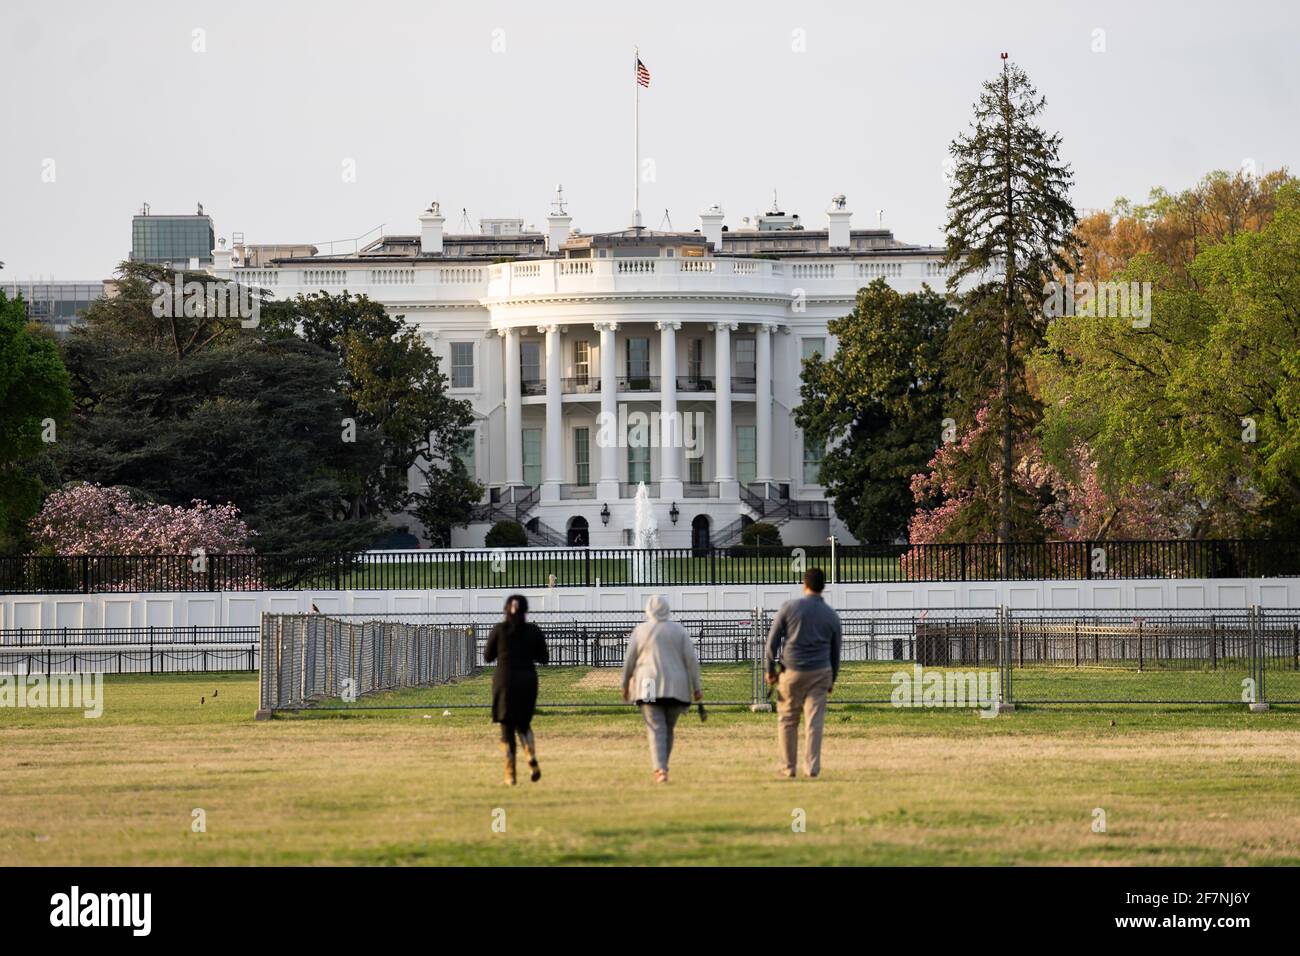 (210409) -- WASHINGTON, D.C., April 9, 2021 (Xinhua) -- Photo taken on April 8, 2021 shows the White House in Washington, DC, the United States. U.S. President Joe Biden on Thursday called gun violence an 'epidemic' and an 'international embarrassment,' as he delivered a speech from the White House introducing new executive actions aimed at addressing the issue. (Xinhua/Liu Jie) Credit: Liu Jie/Xinhua/Alamy Live News Stock Photo